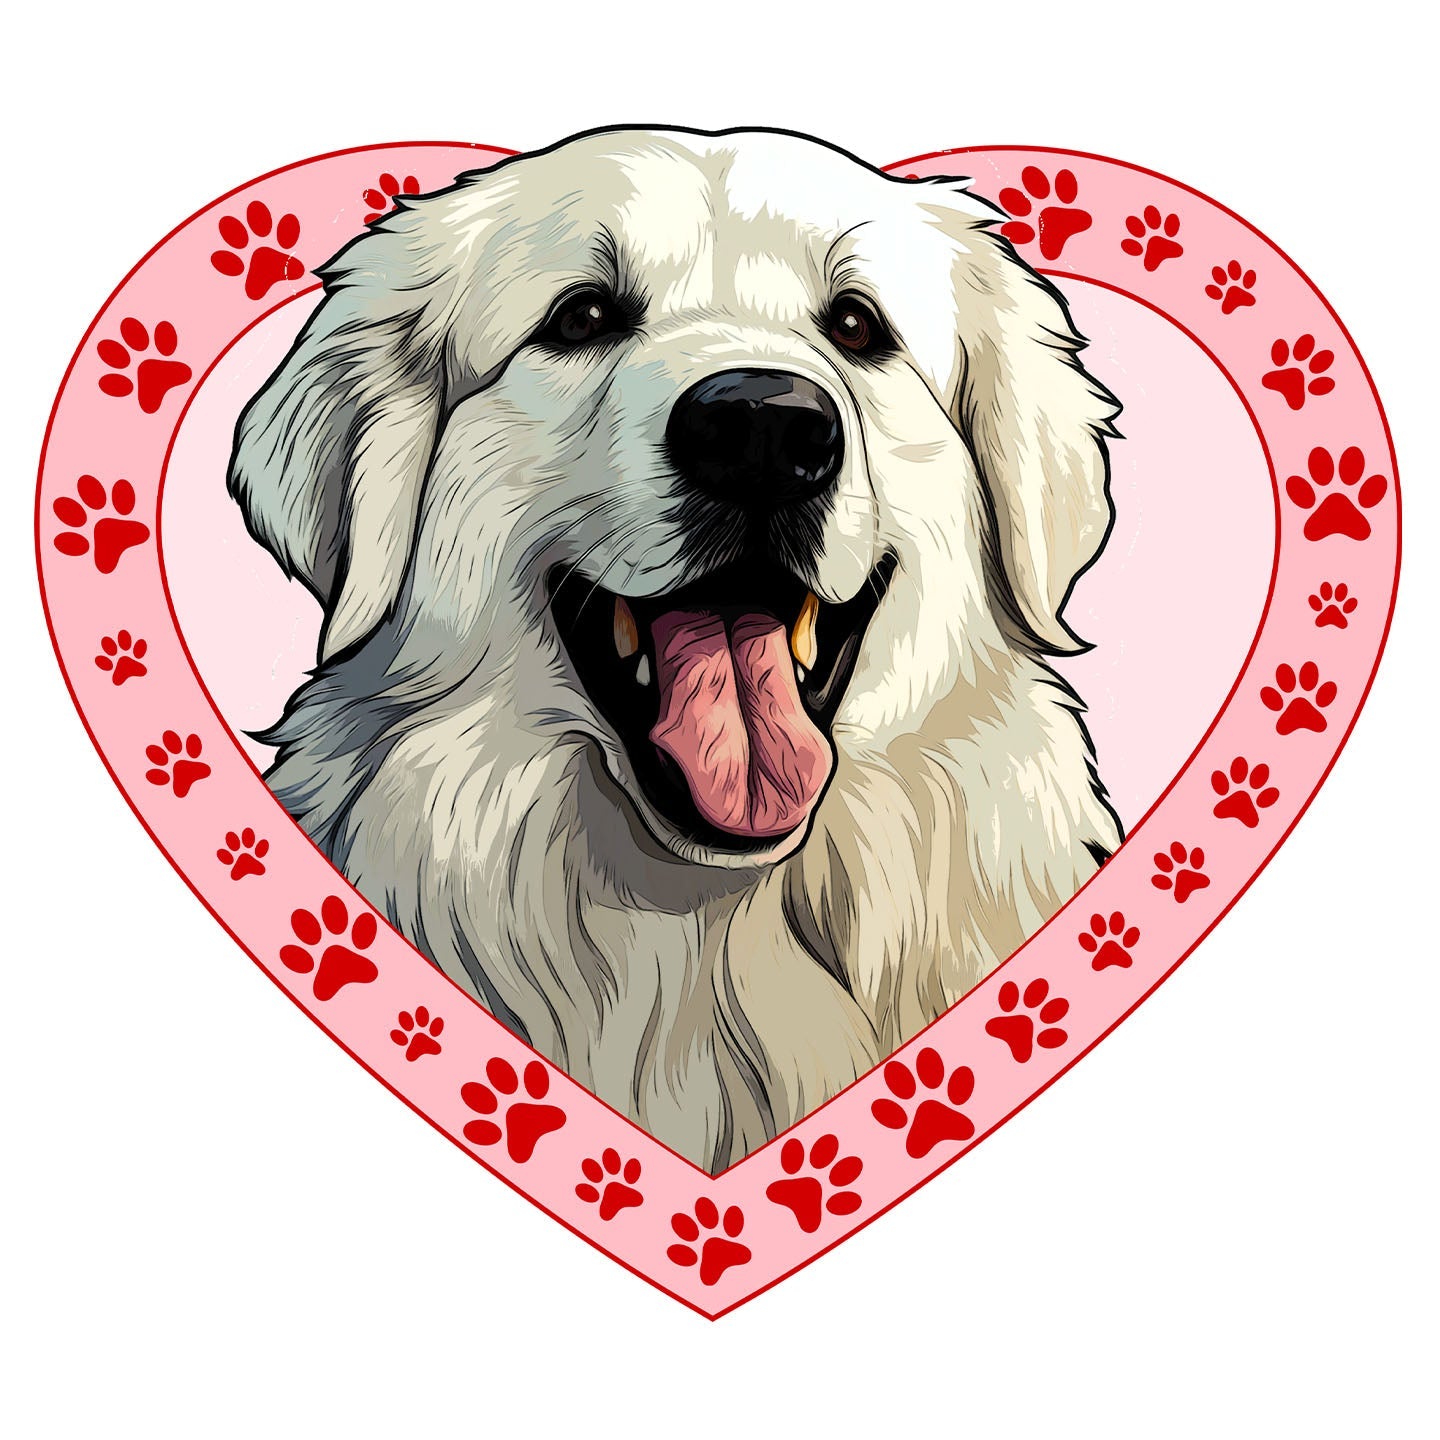 Great Pyrenees Illustration In Heart - Adult Unisex T-Shirt